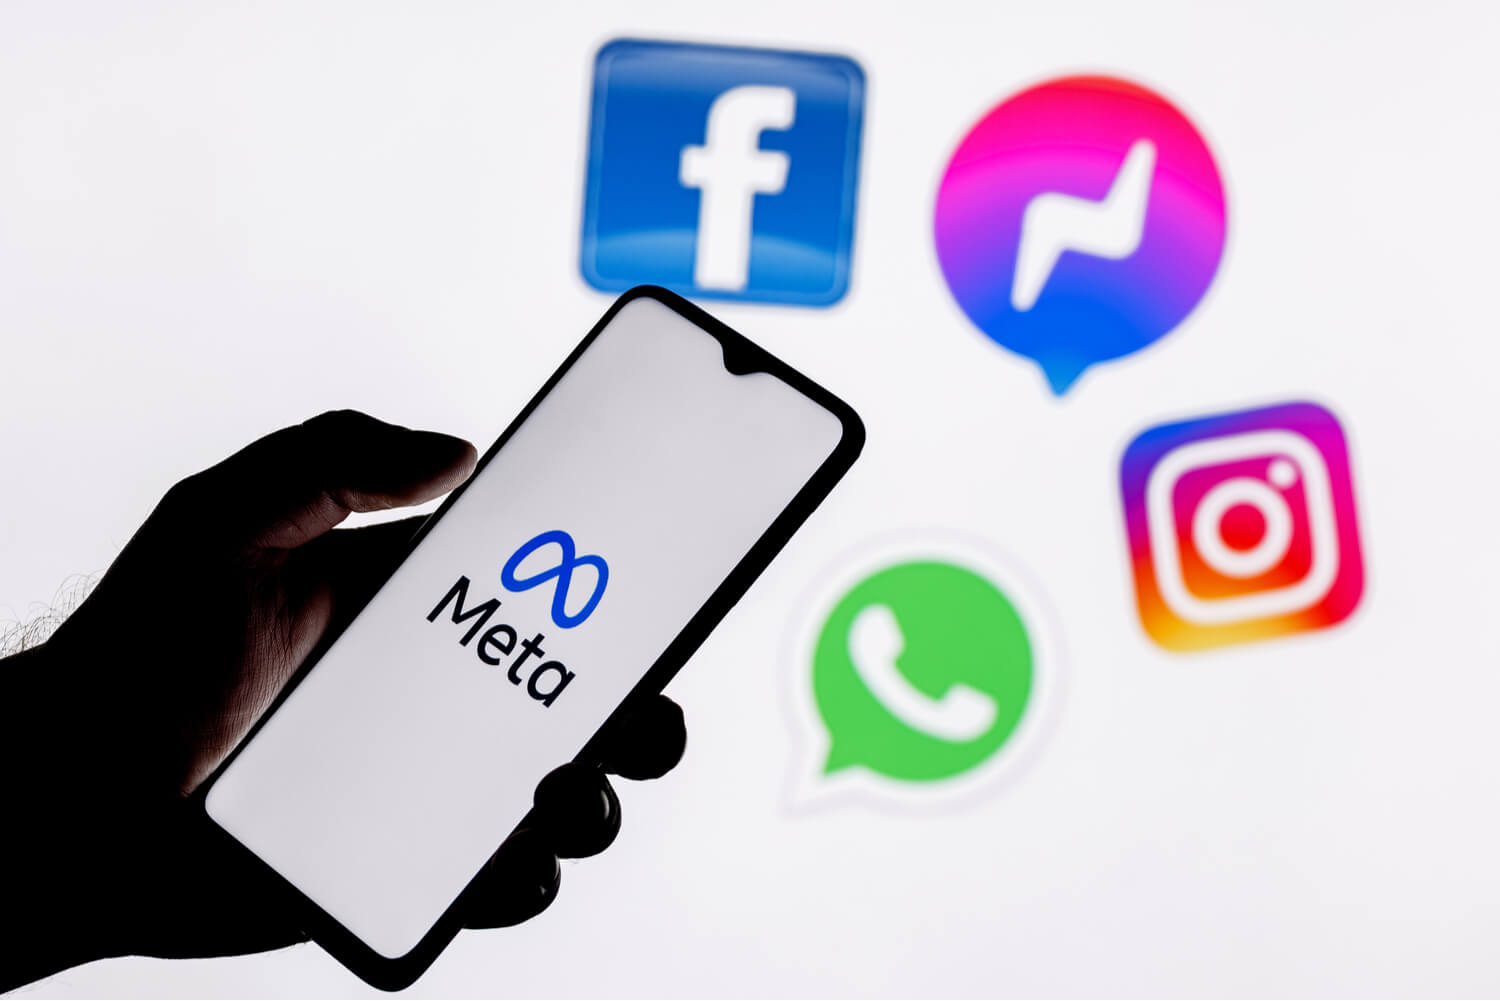 Meta symbol on a smartphone in front of the social media logos of Facebook, Instagram, WhatsApp, and Messenger